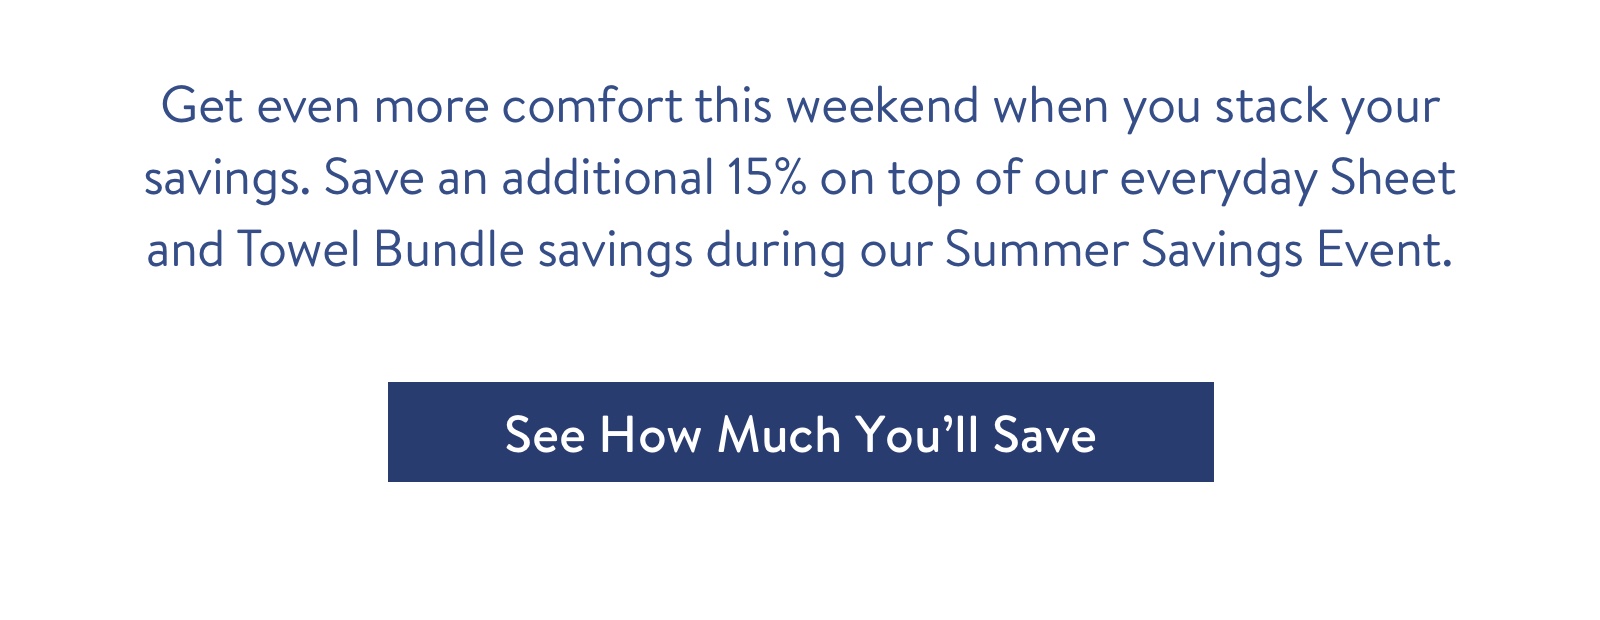 Get even more comfort this weekend when you stack your savings. Save an additional 15% on top of our everyday Sheet and Towel Bundle savings during our Summer Savings Event.